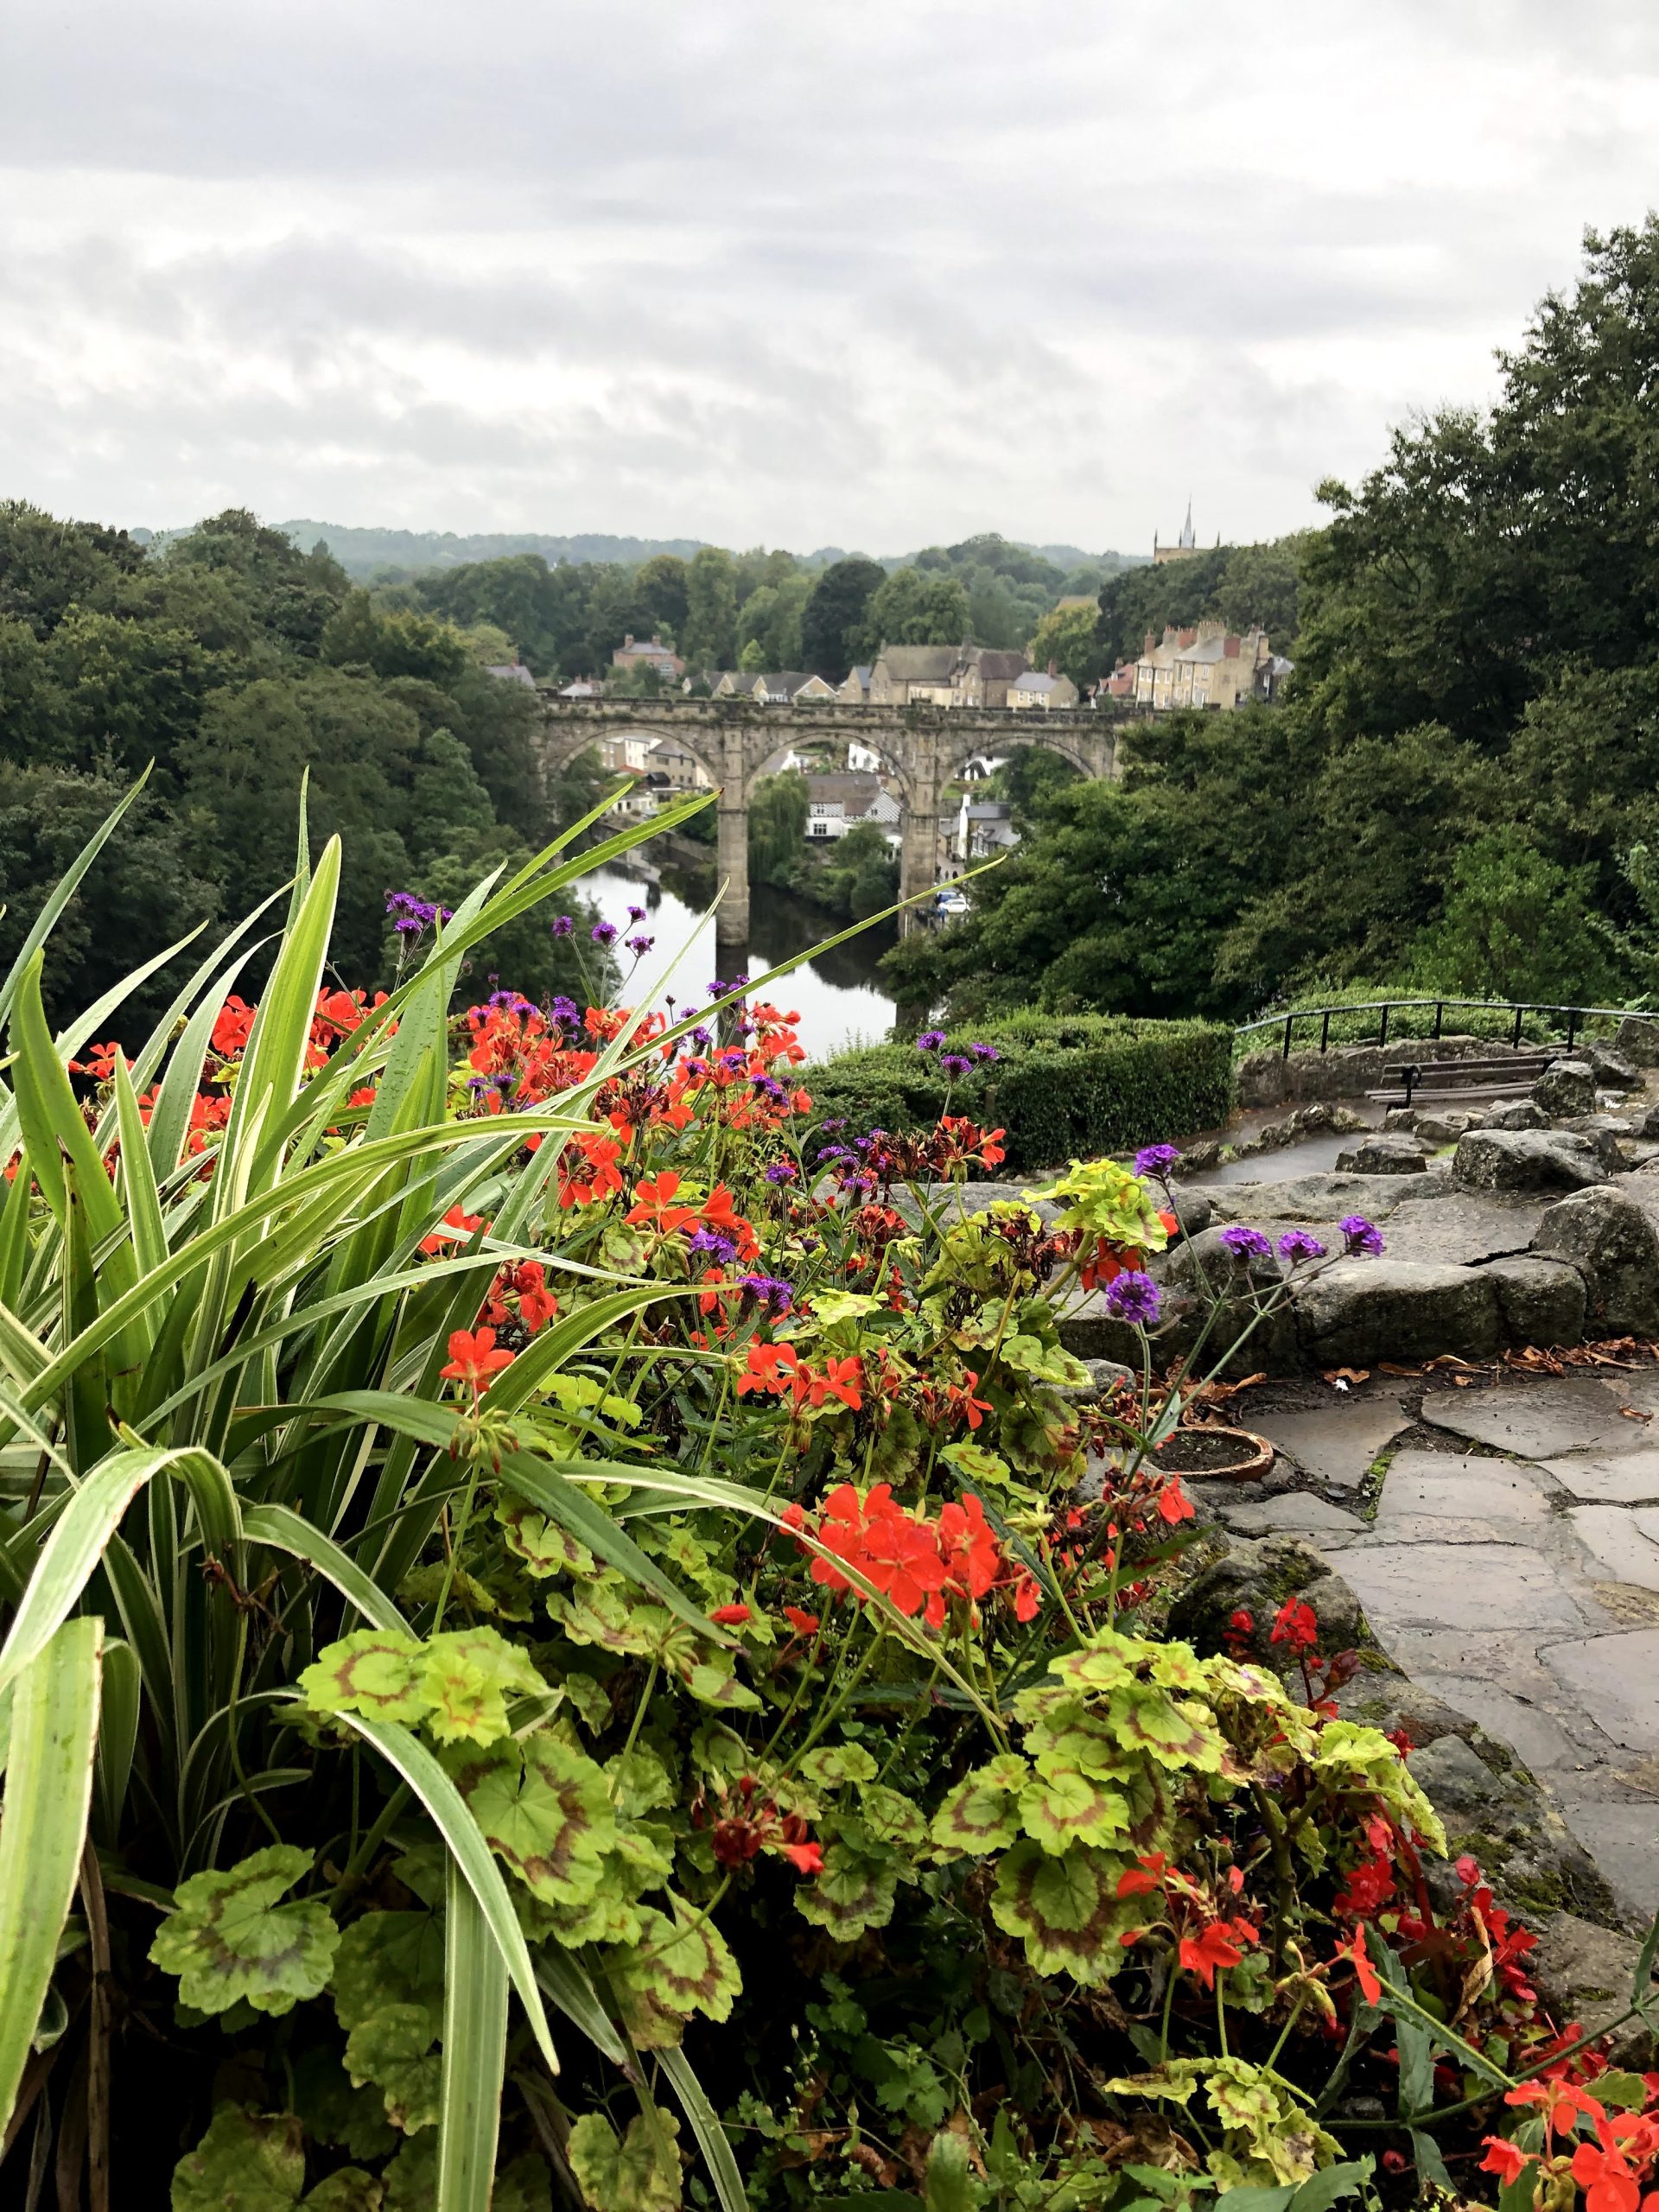 View of the Knaresborough viaduct from the castle grounds